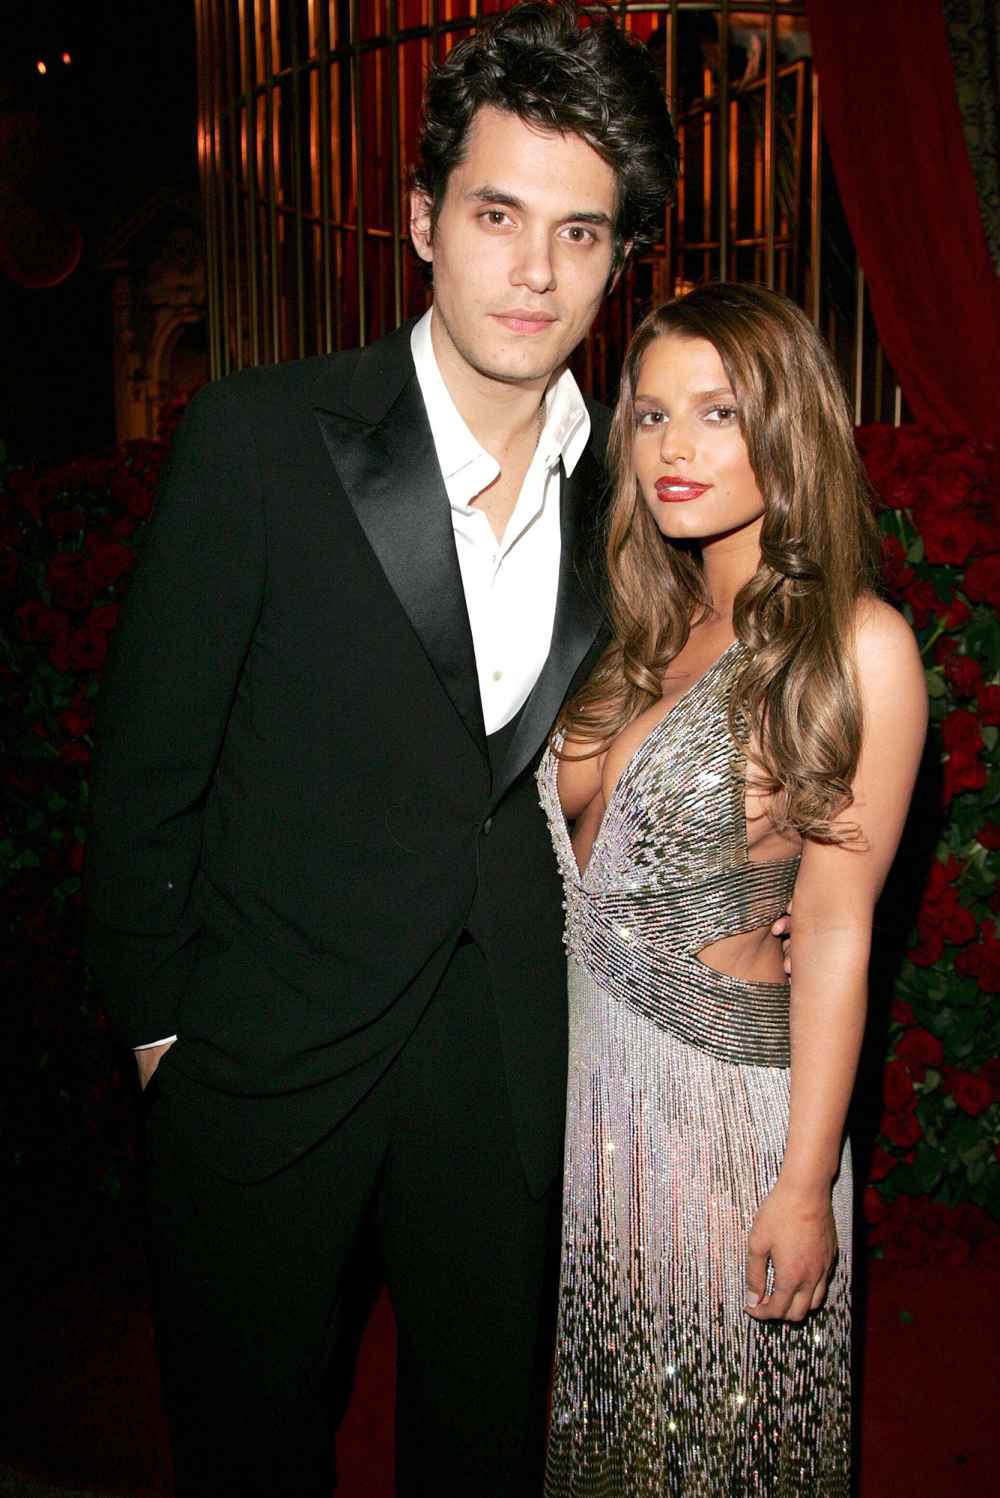 Jessica Simpson Started Relying on Alcohol While Dating John Mayer